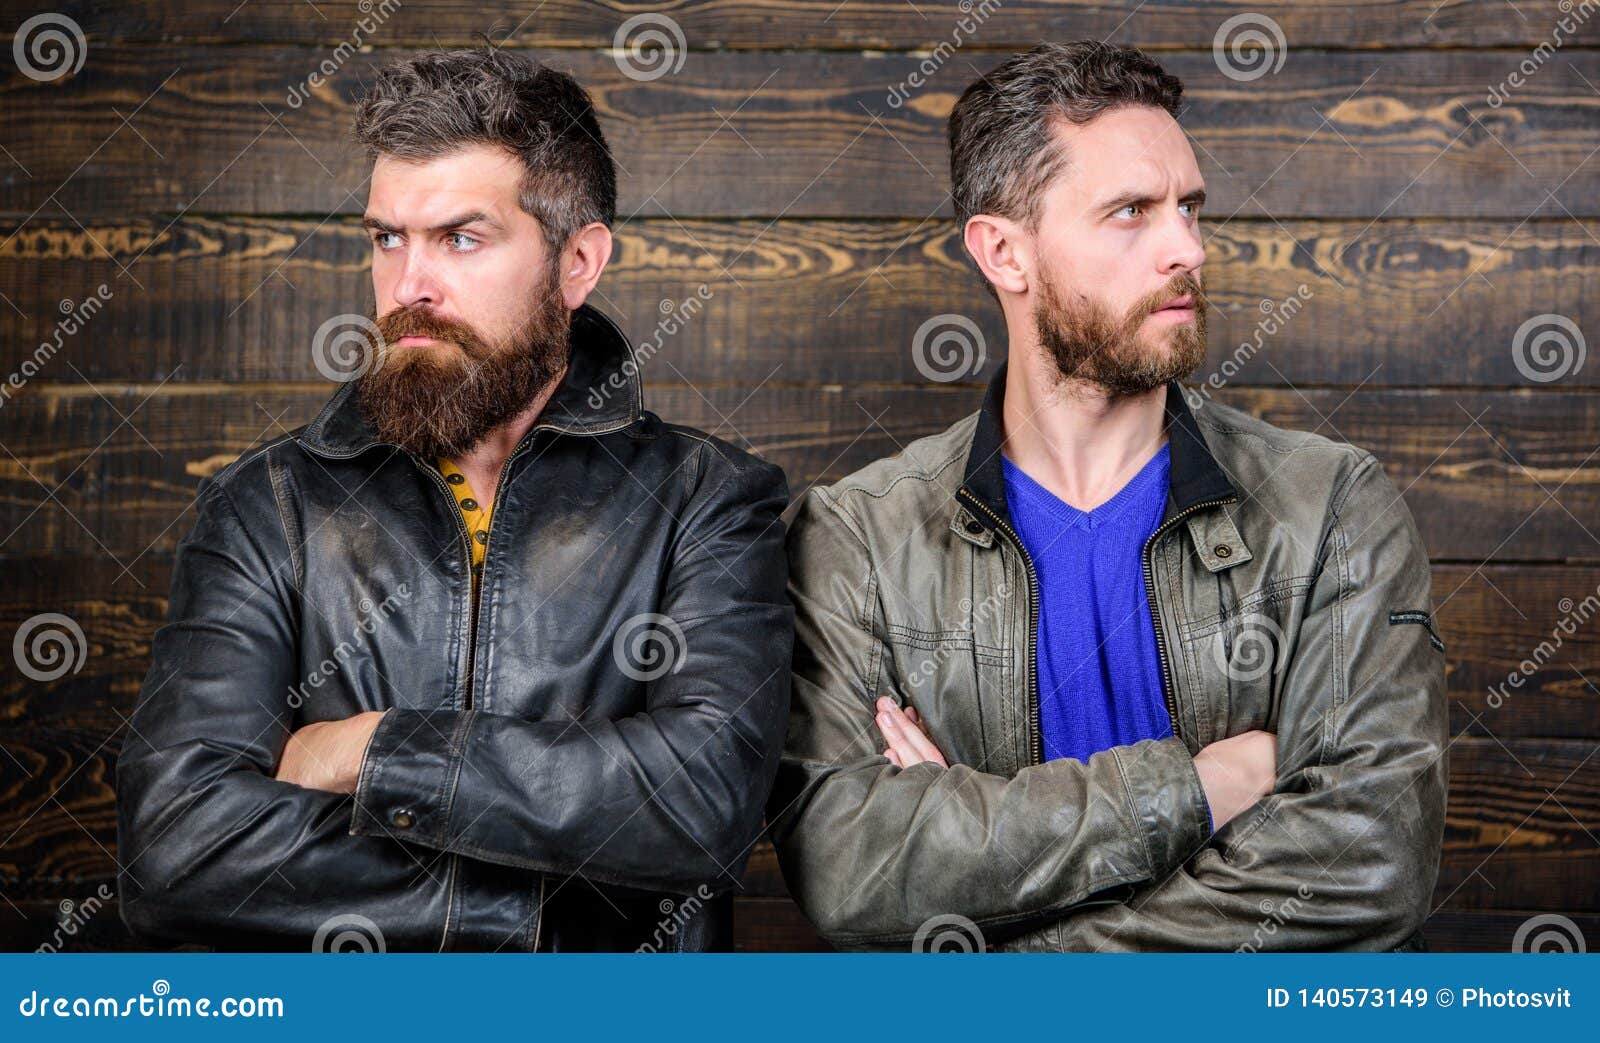 Men Brutal Bearded Hipster. Exude Masculinity. Confident Competitors ...